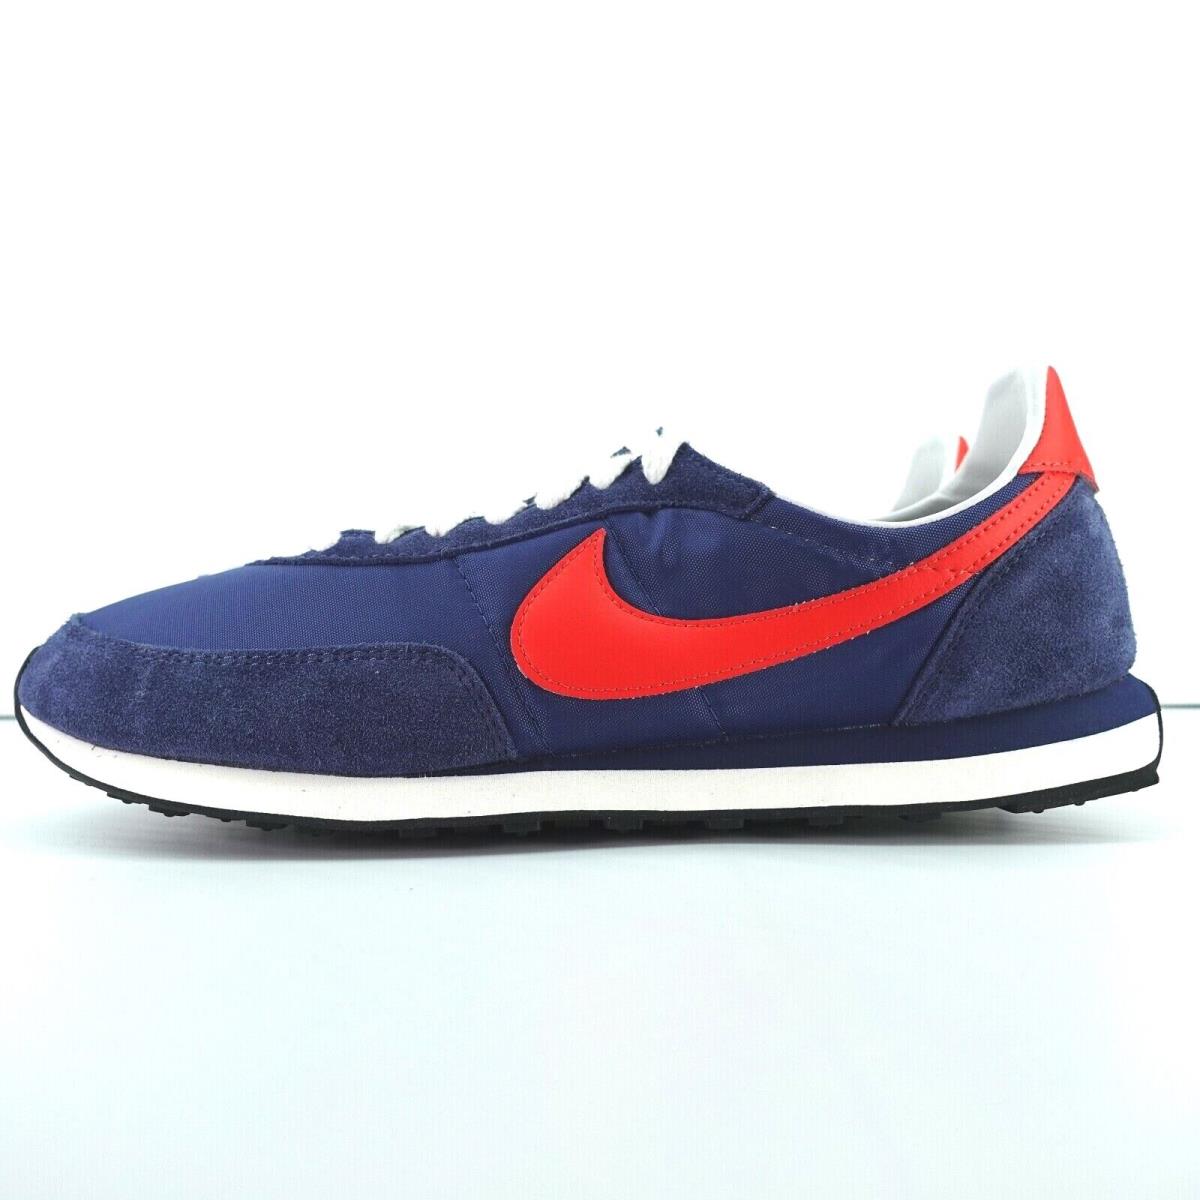 Nike Waffle Trainer 2 SP Midnight Navy Mens Shoes DB3004-400 Size 9